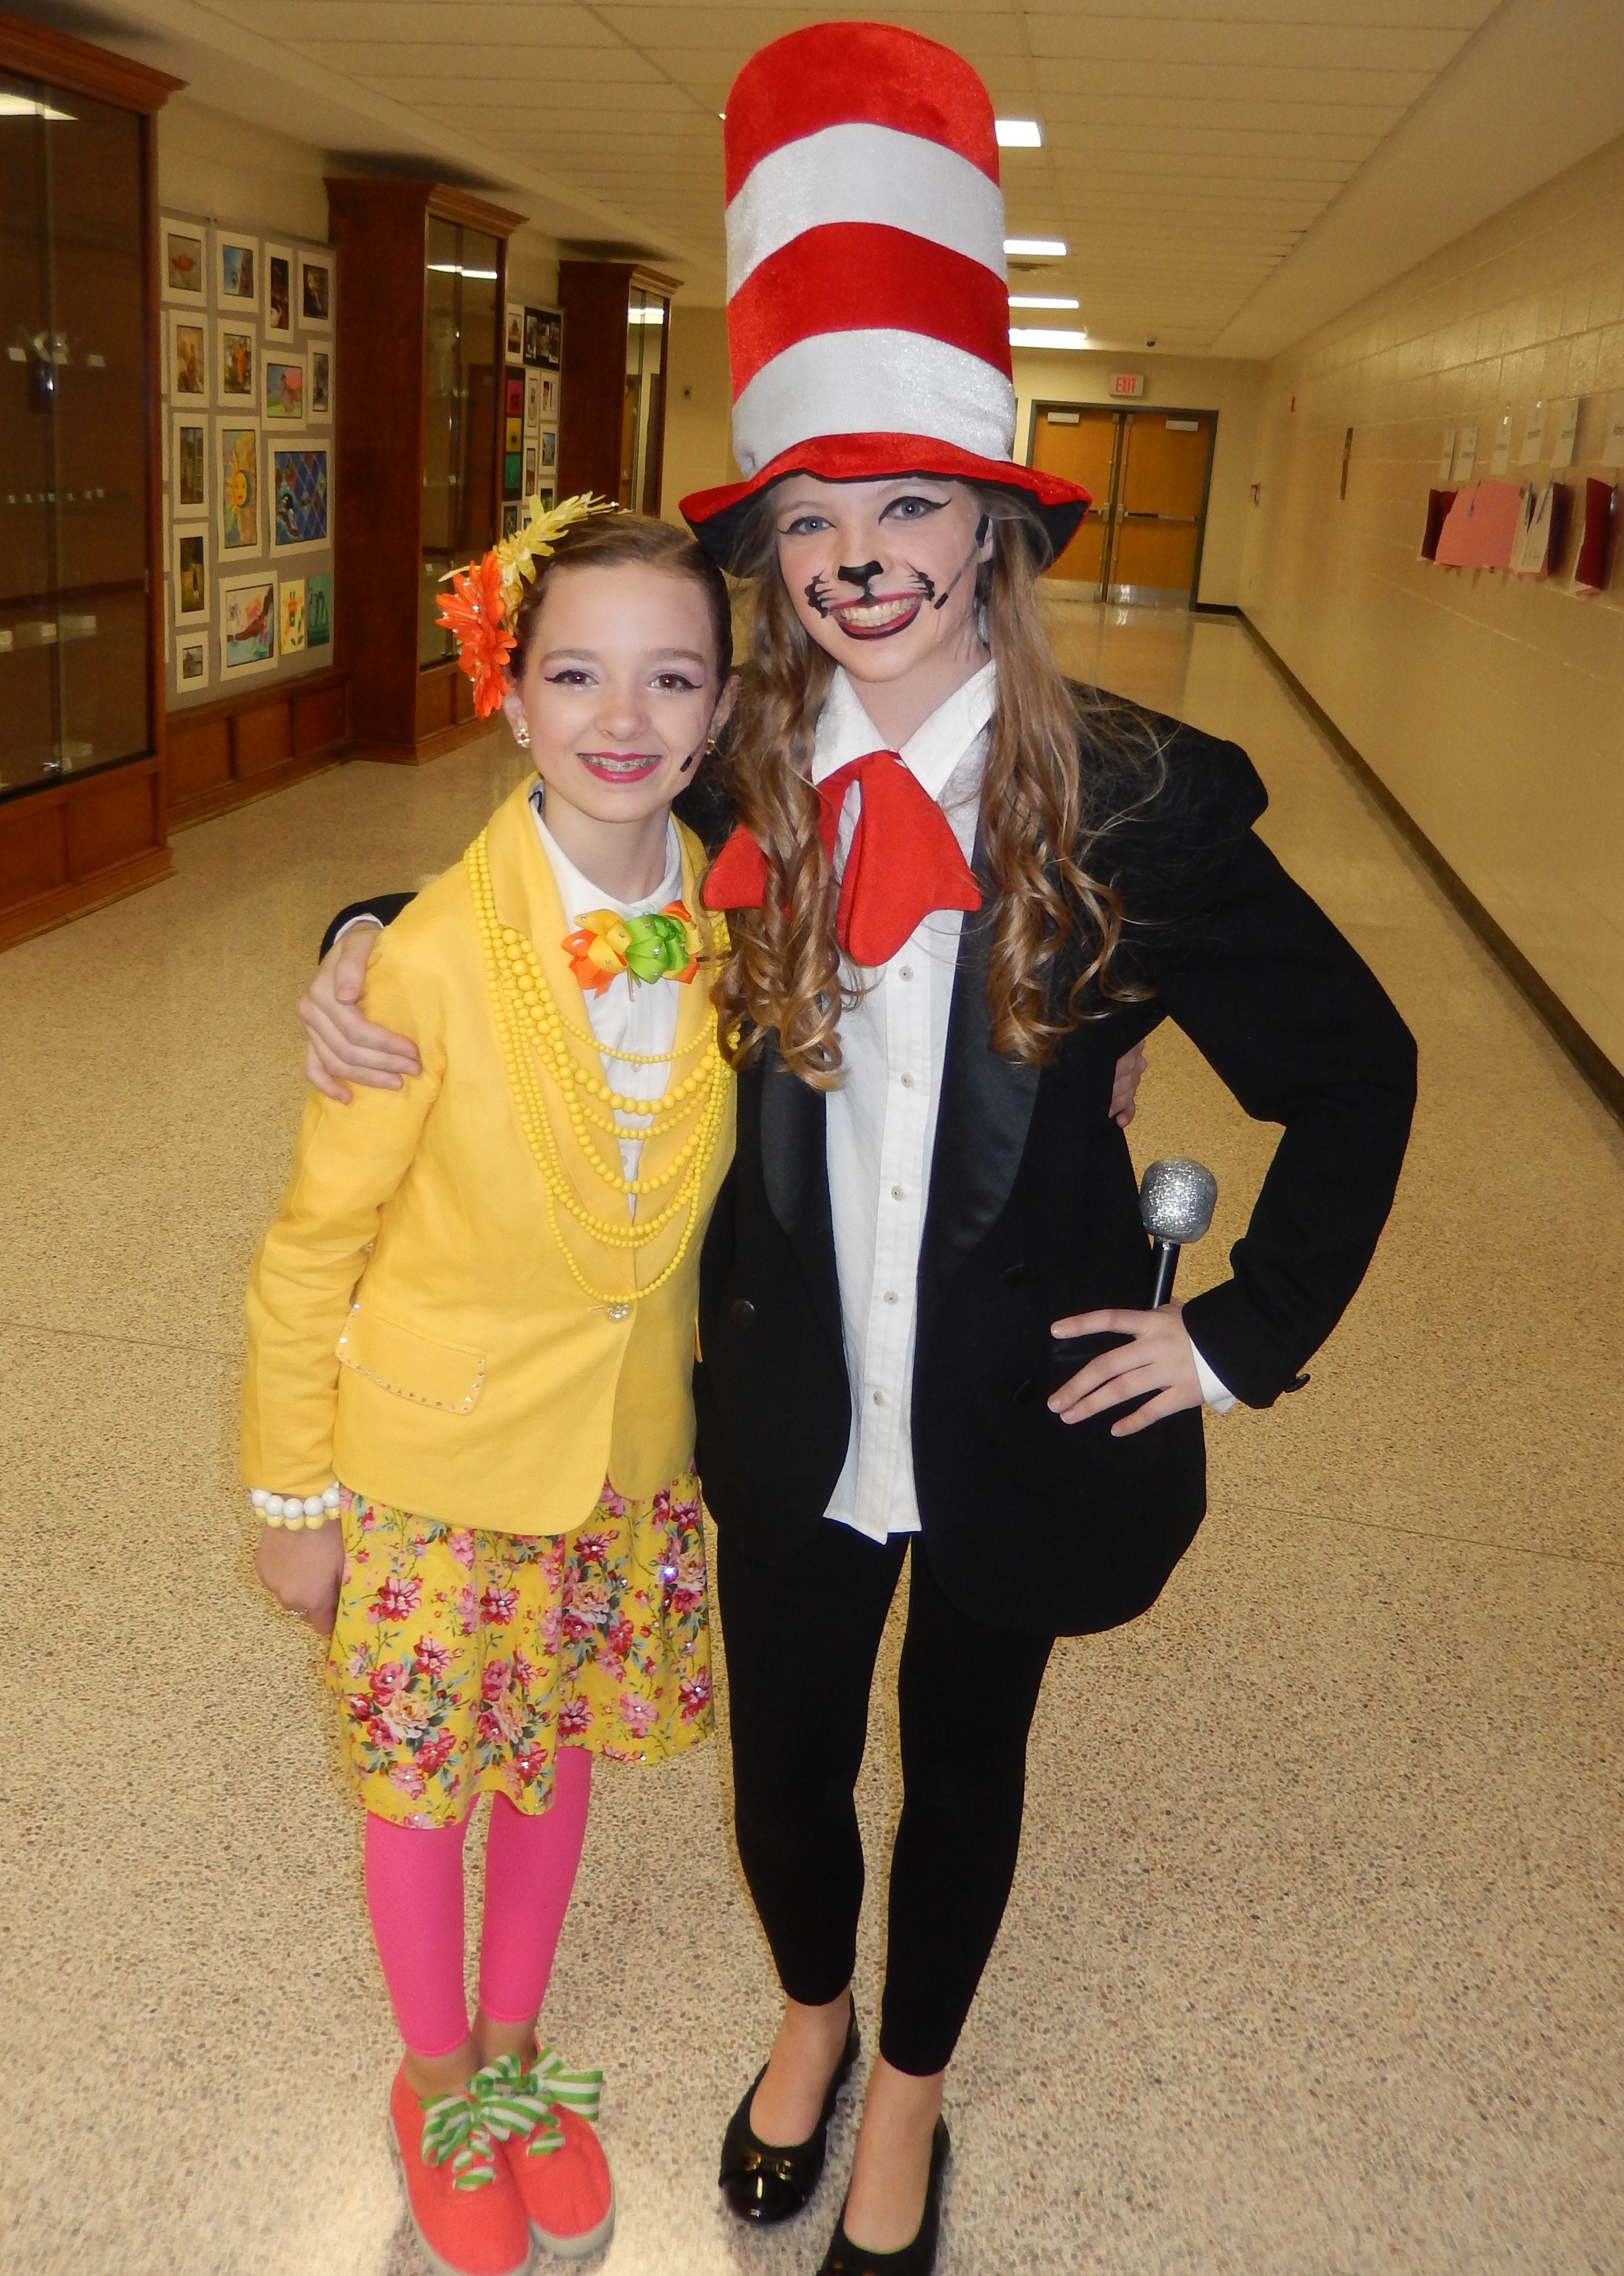 Seussical Musical as Mrs Mayor Backstage with Dr. Seuss